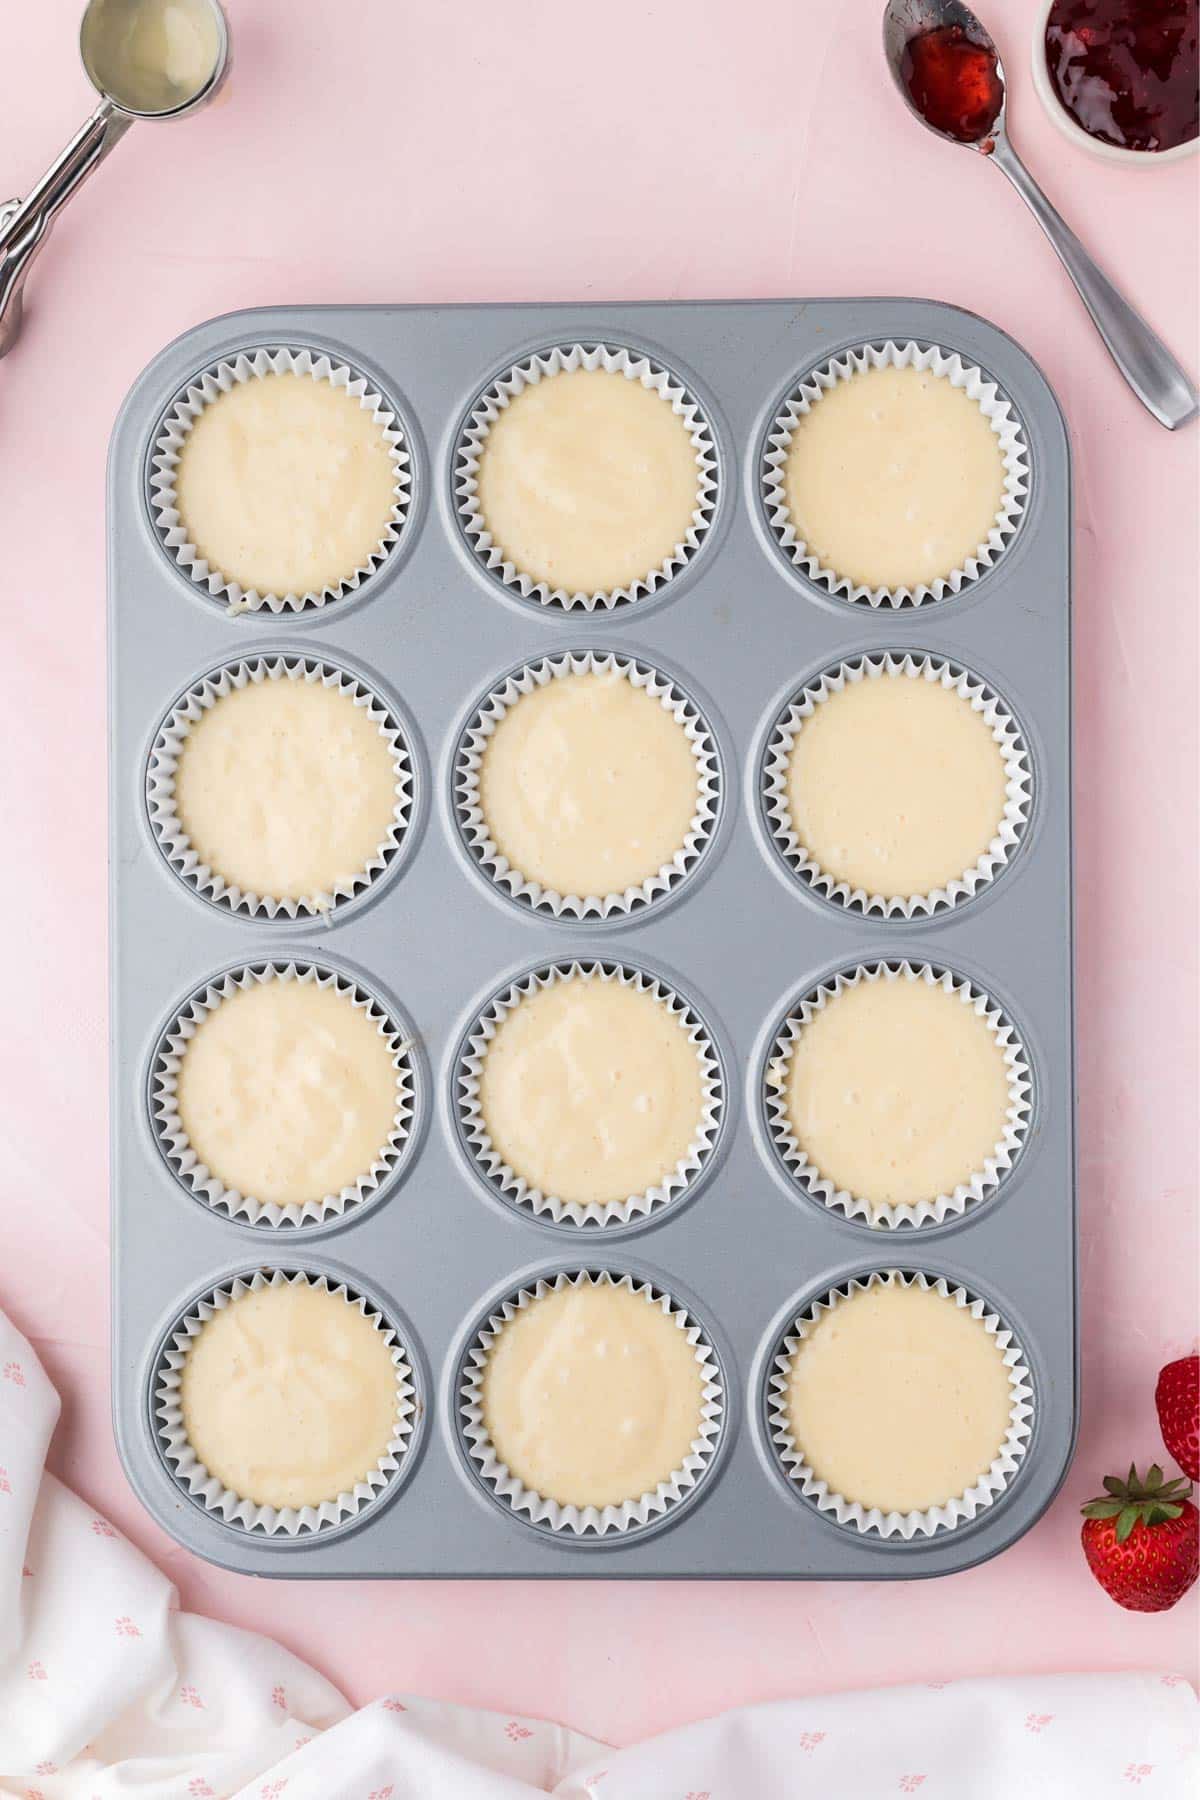 Cupcake pan filled with batter to make strawberry cupcakes.